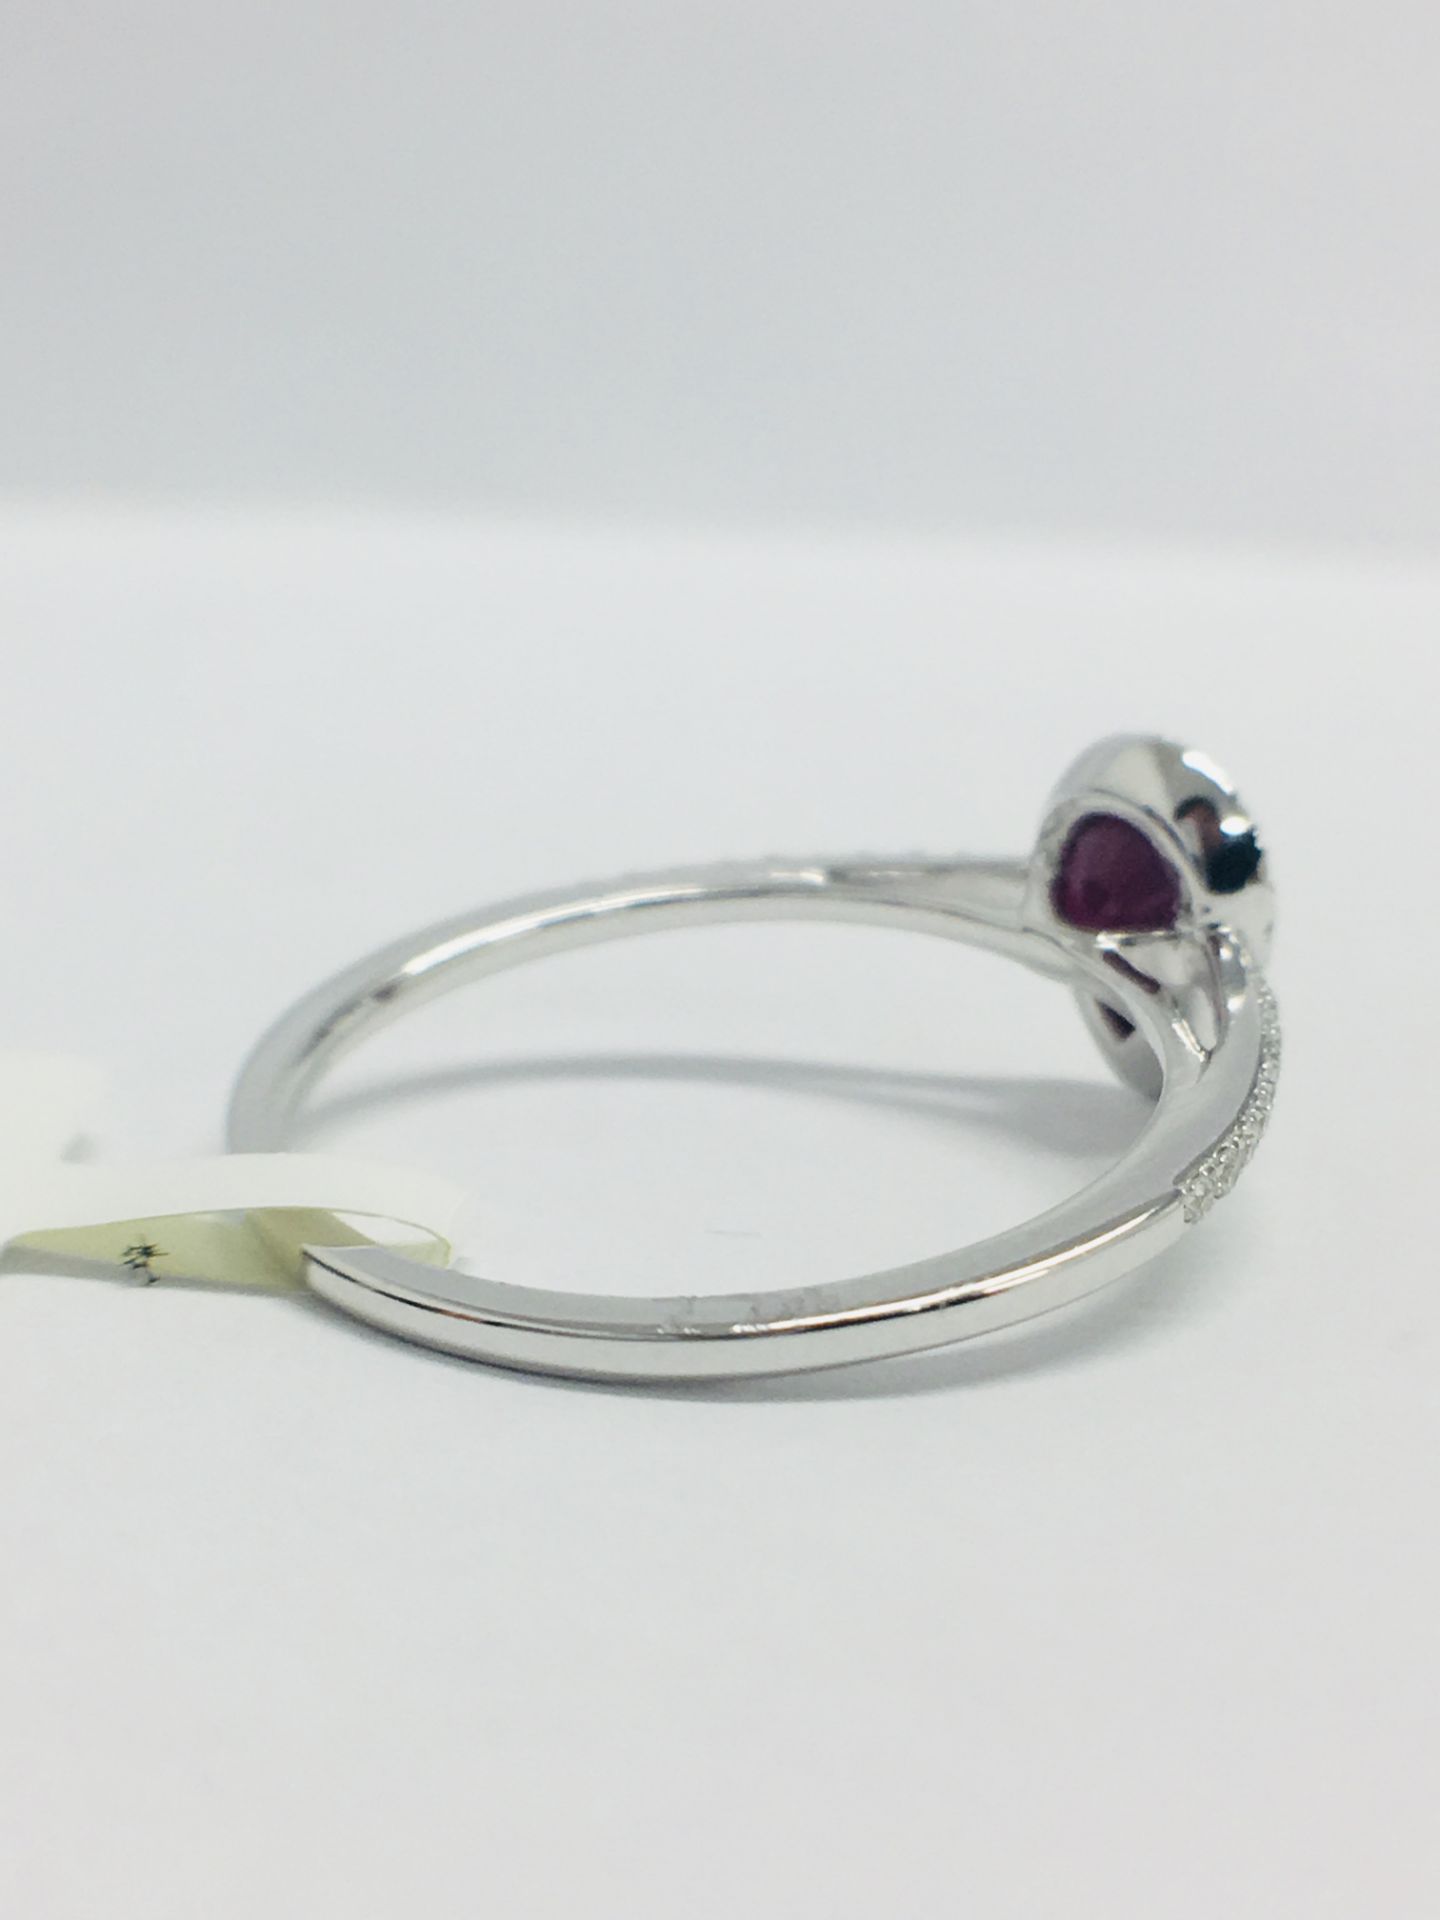 9ct White Pearshape Ruby Diamond Ring - Image 7 of 11